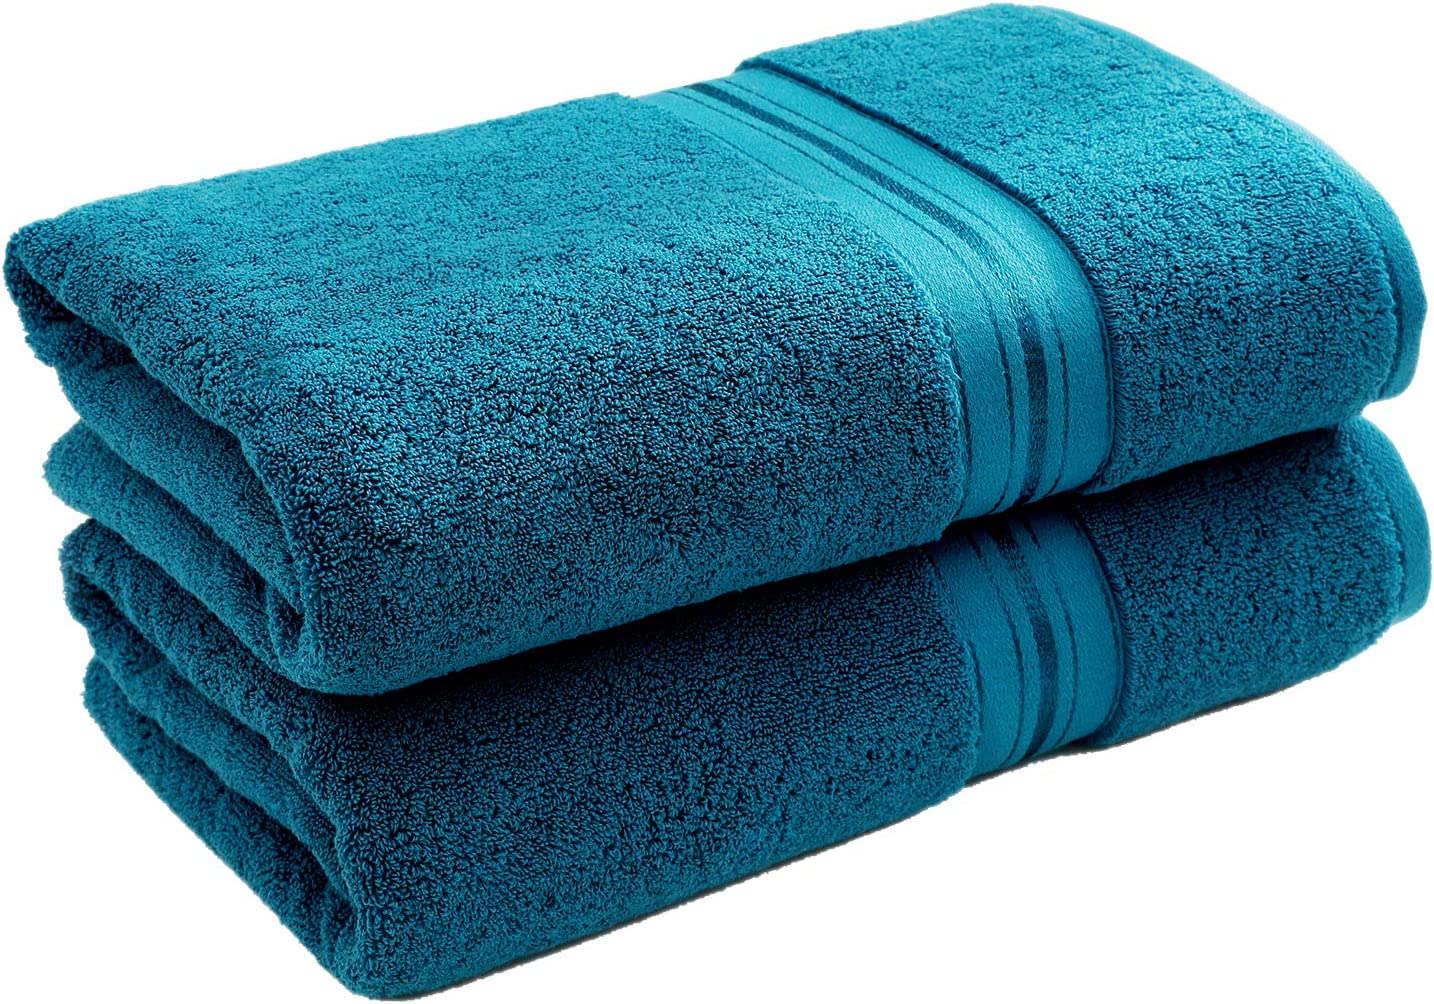 Nobranded Long-Staple Ultra Soft Egyptian Cotton Bath Towels, Set Of 2